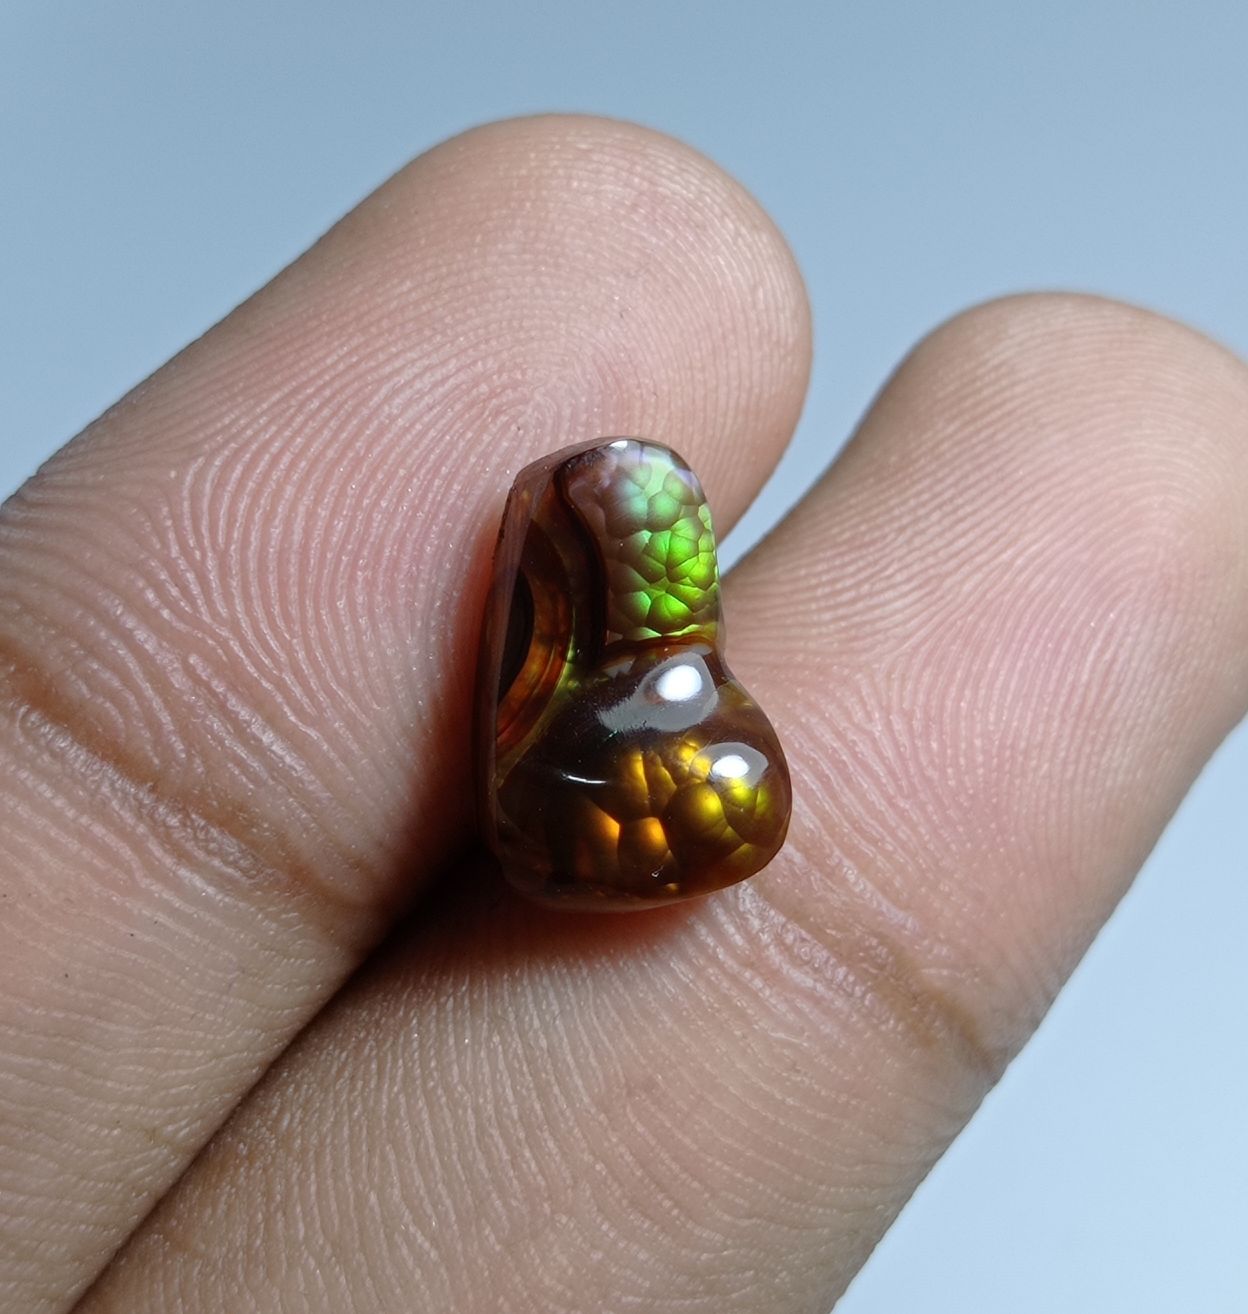 5.6ct Natural Purple , Green and Yellow Fire Agate - Perfect Gemstone Gift For All - Dimensions 14x9x5.5mm